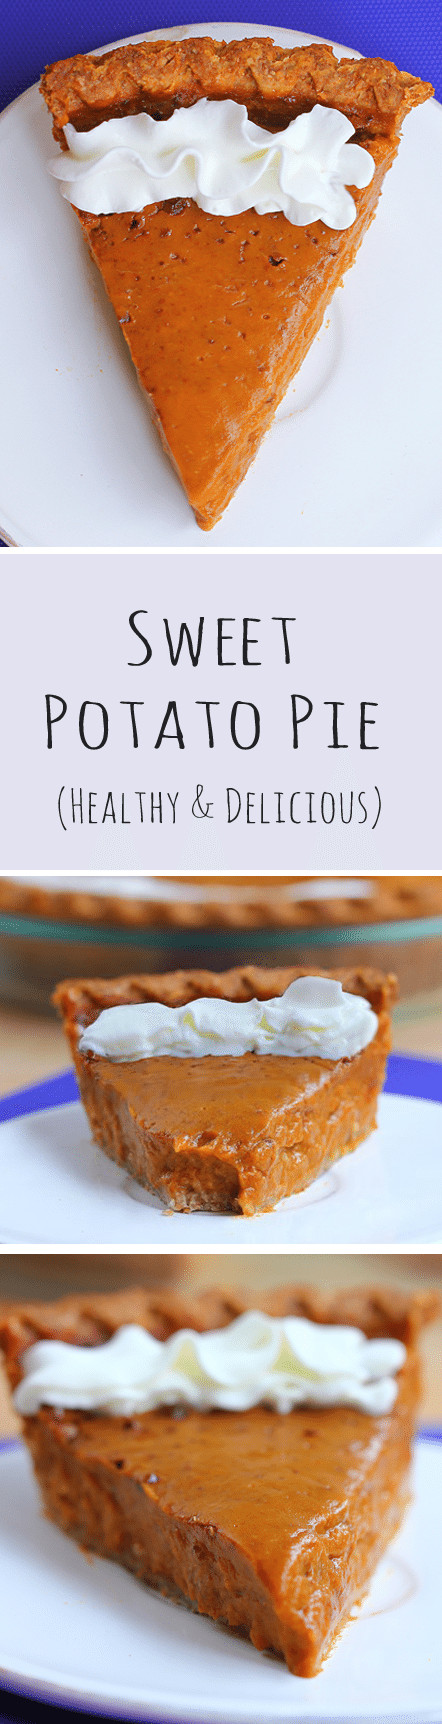 Healthy Sweet Potato Pie
 Healthy Sweet Potato Pie with homemade pie crust